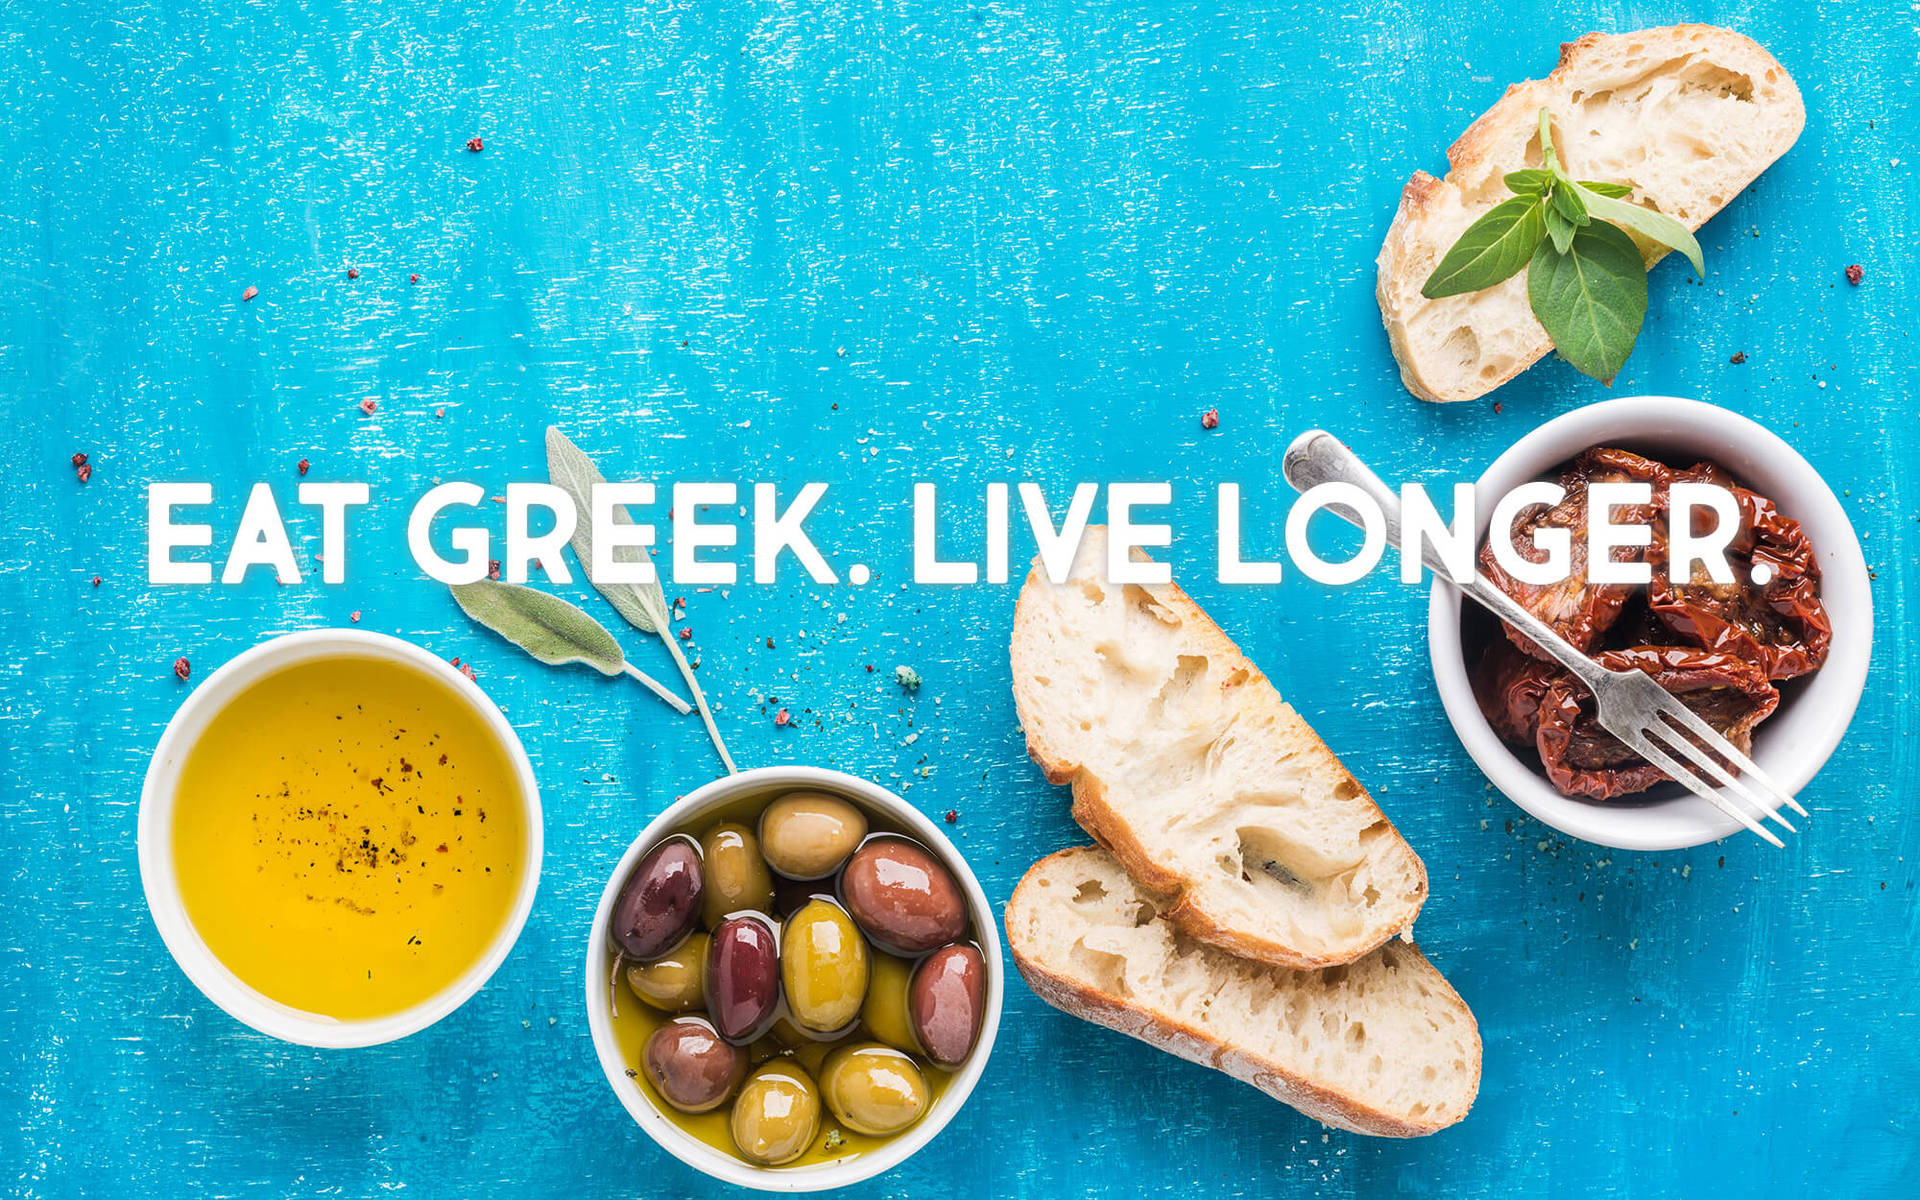 Greek Deli A Delicious Burst of Colors and Flavors!